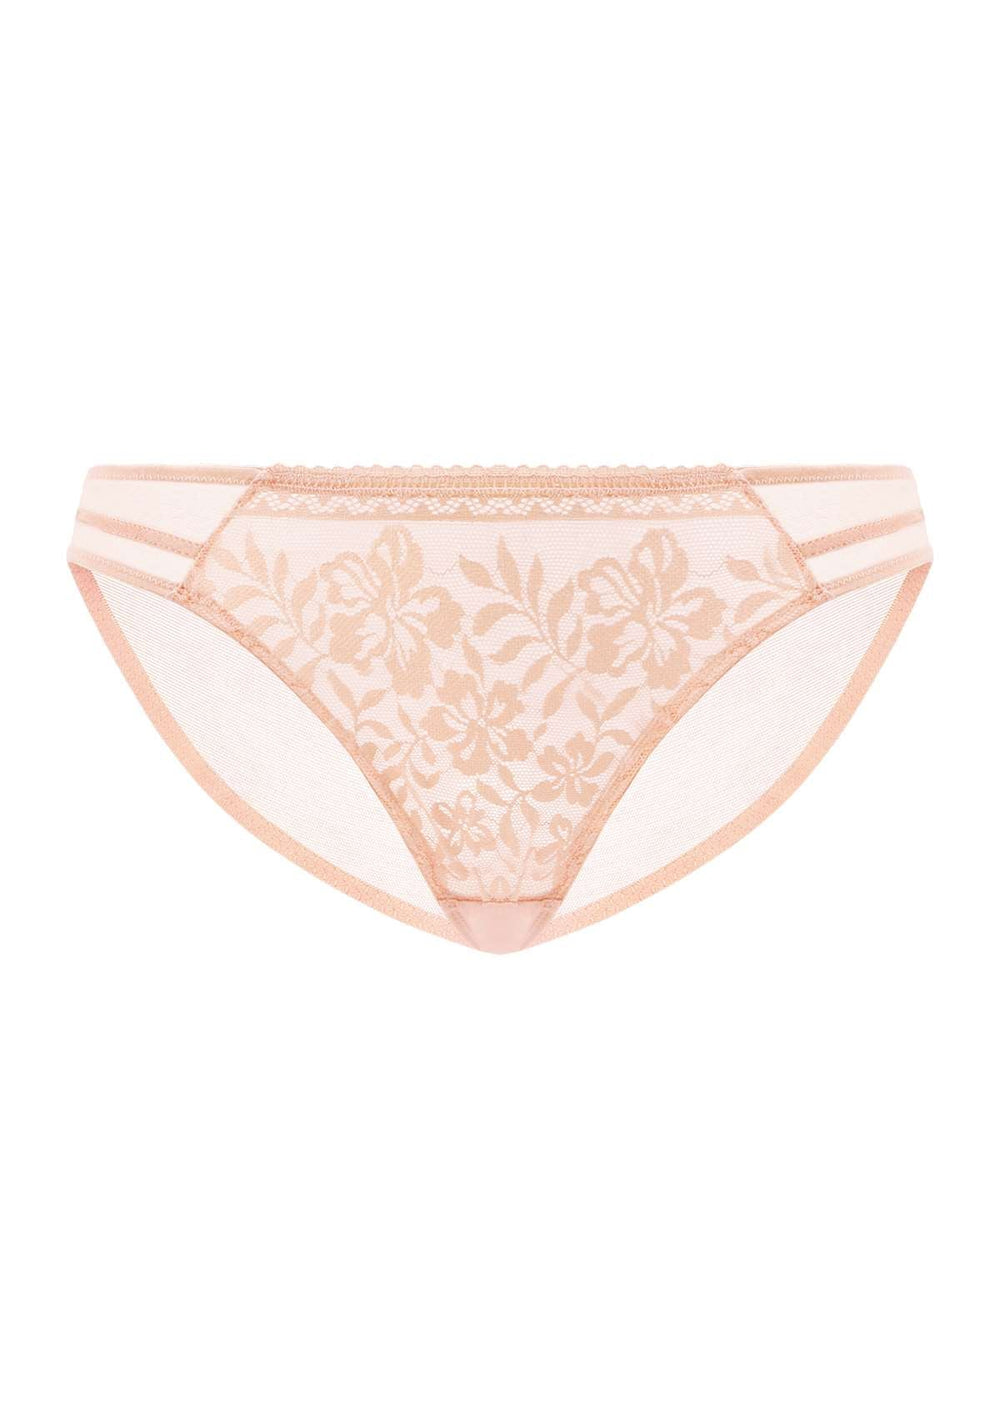 https://www.hsialife.com/cdn/shop/products/fpc0410ppim-hsia-hsia-hibisci-floral-lace-hipster-underwear-m-peach-38408537637113.jpg?v=1683597205&width=1000